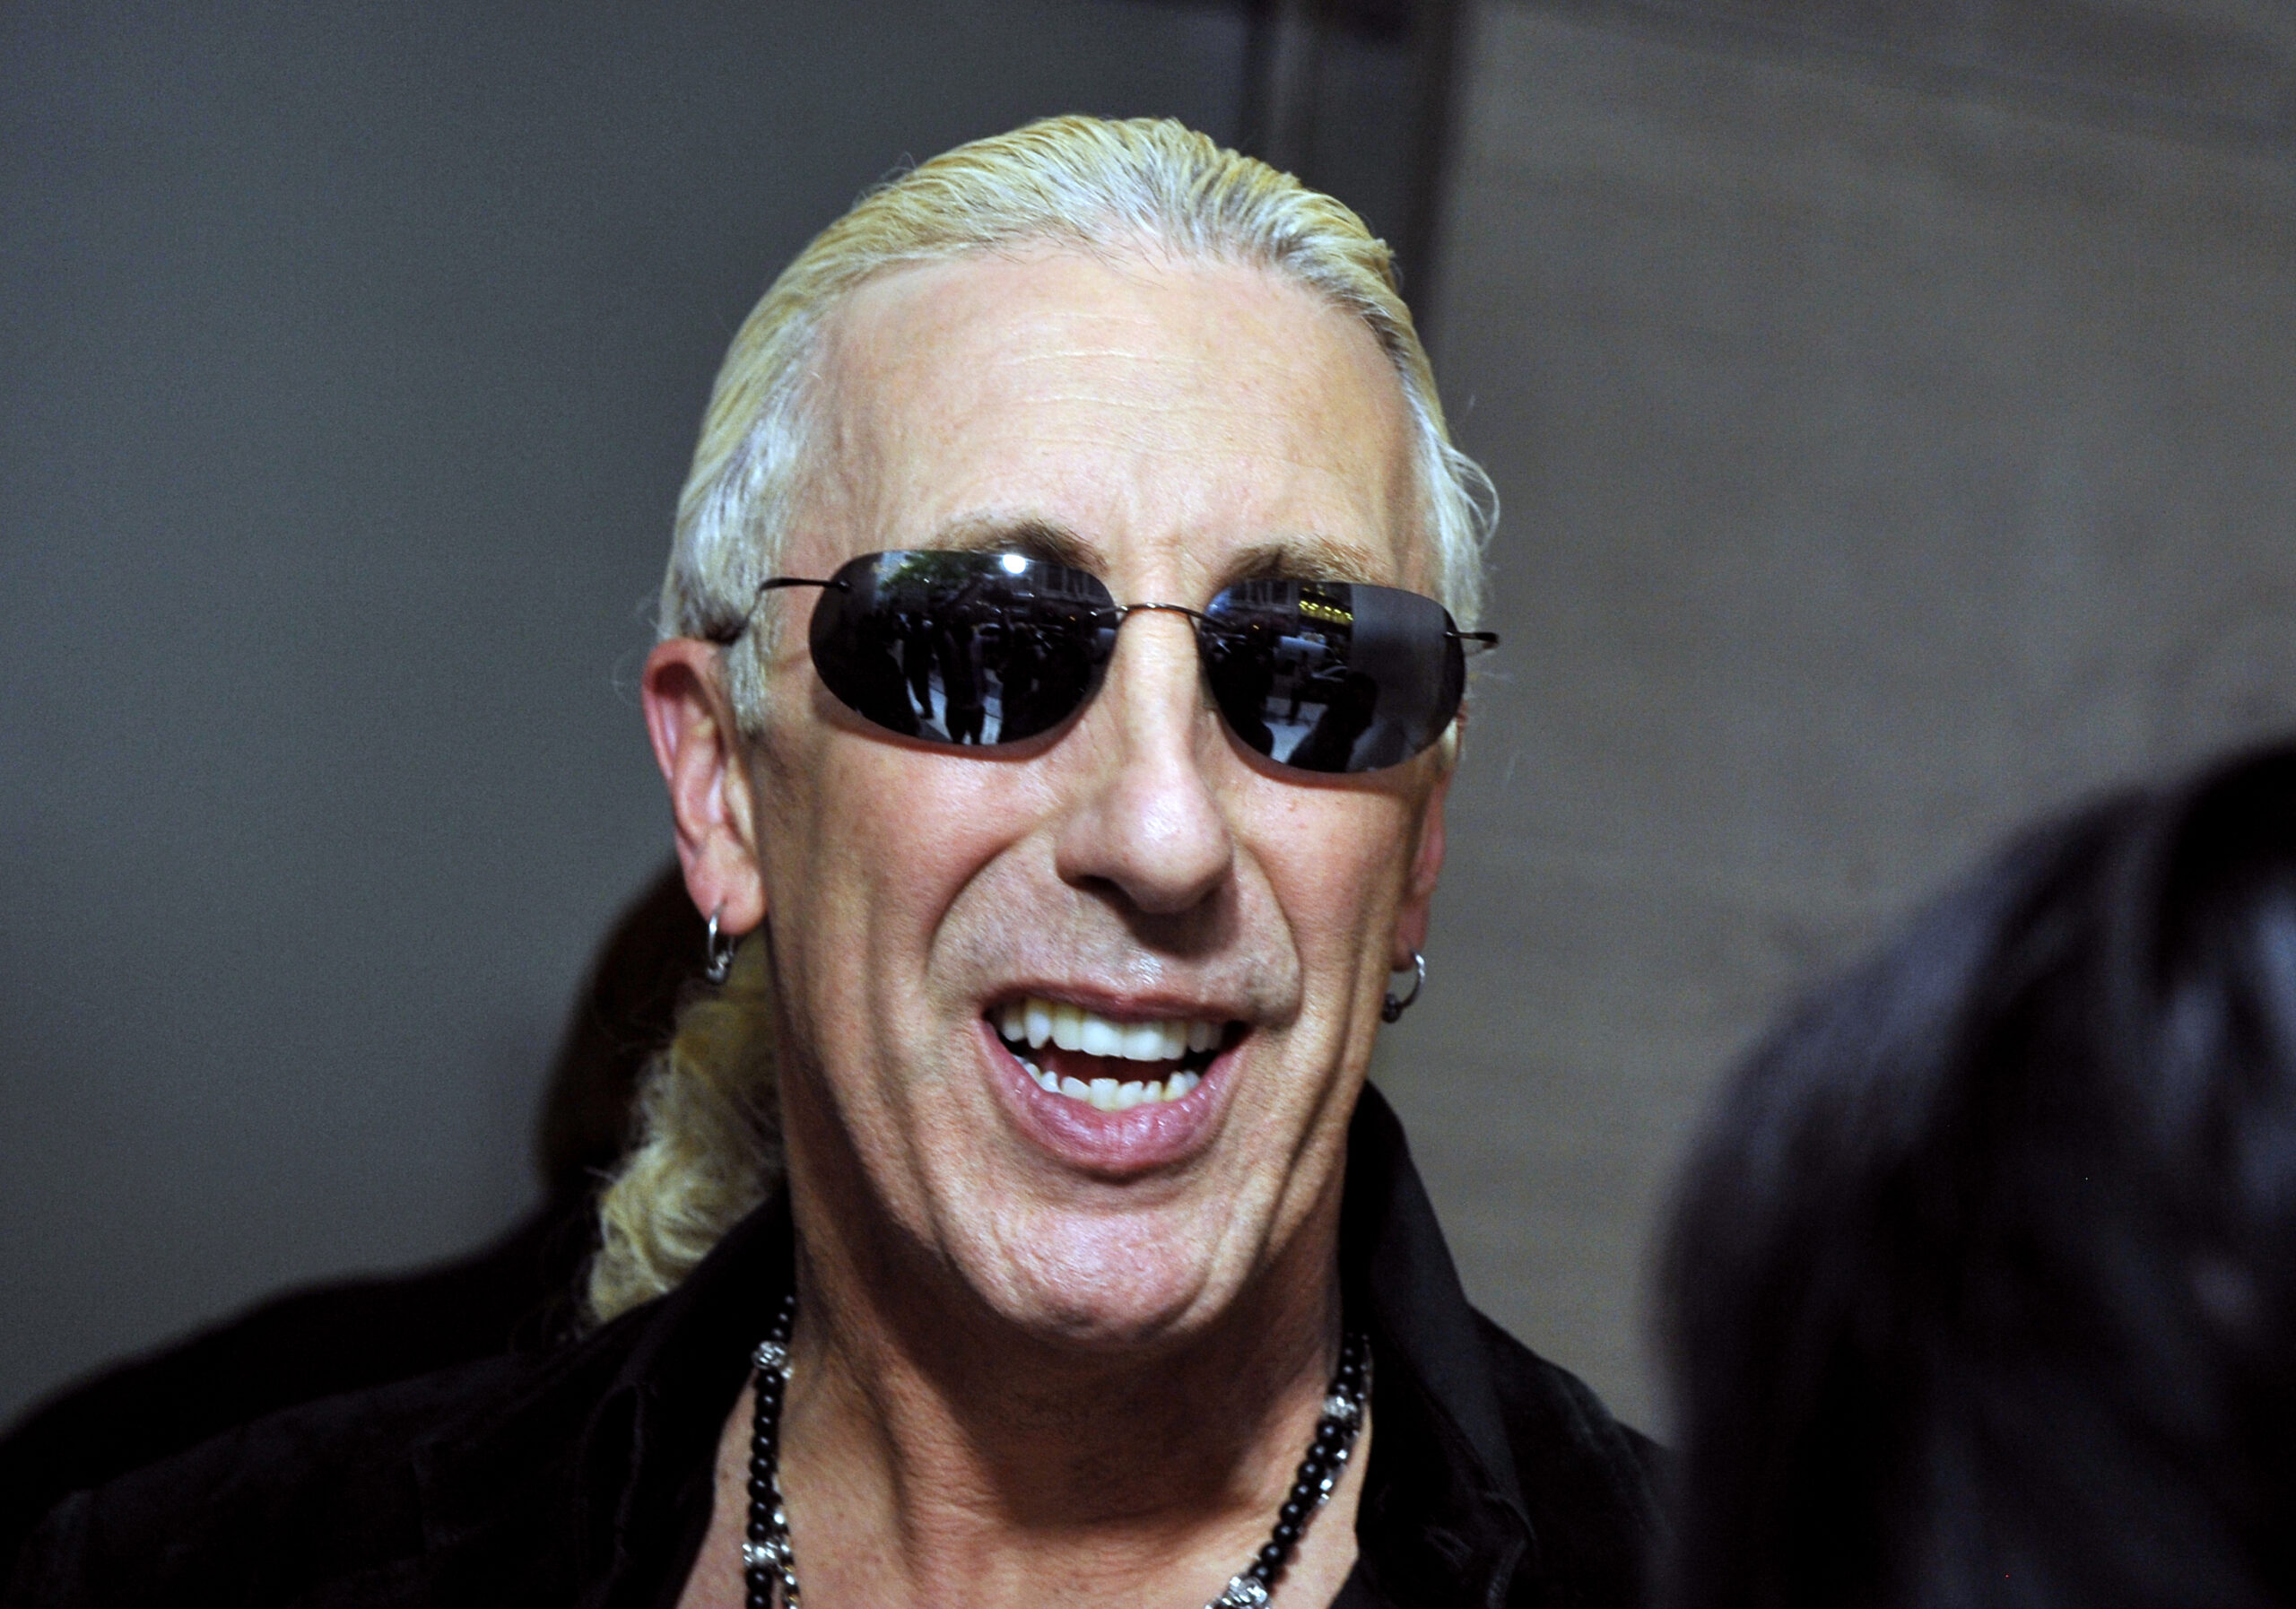 Twisted Sister singer responds to being removed from SF Pride Parade: “Am I really transphobic?”